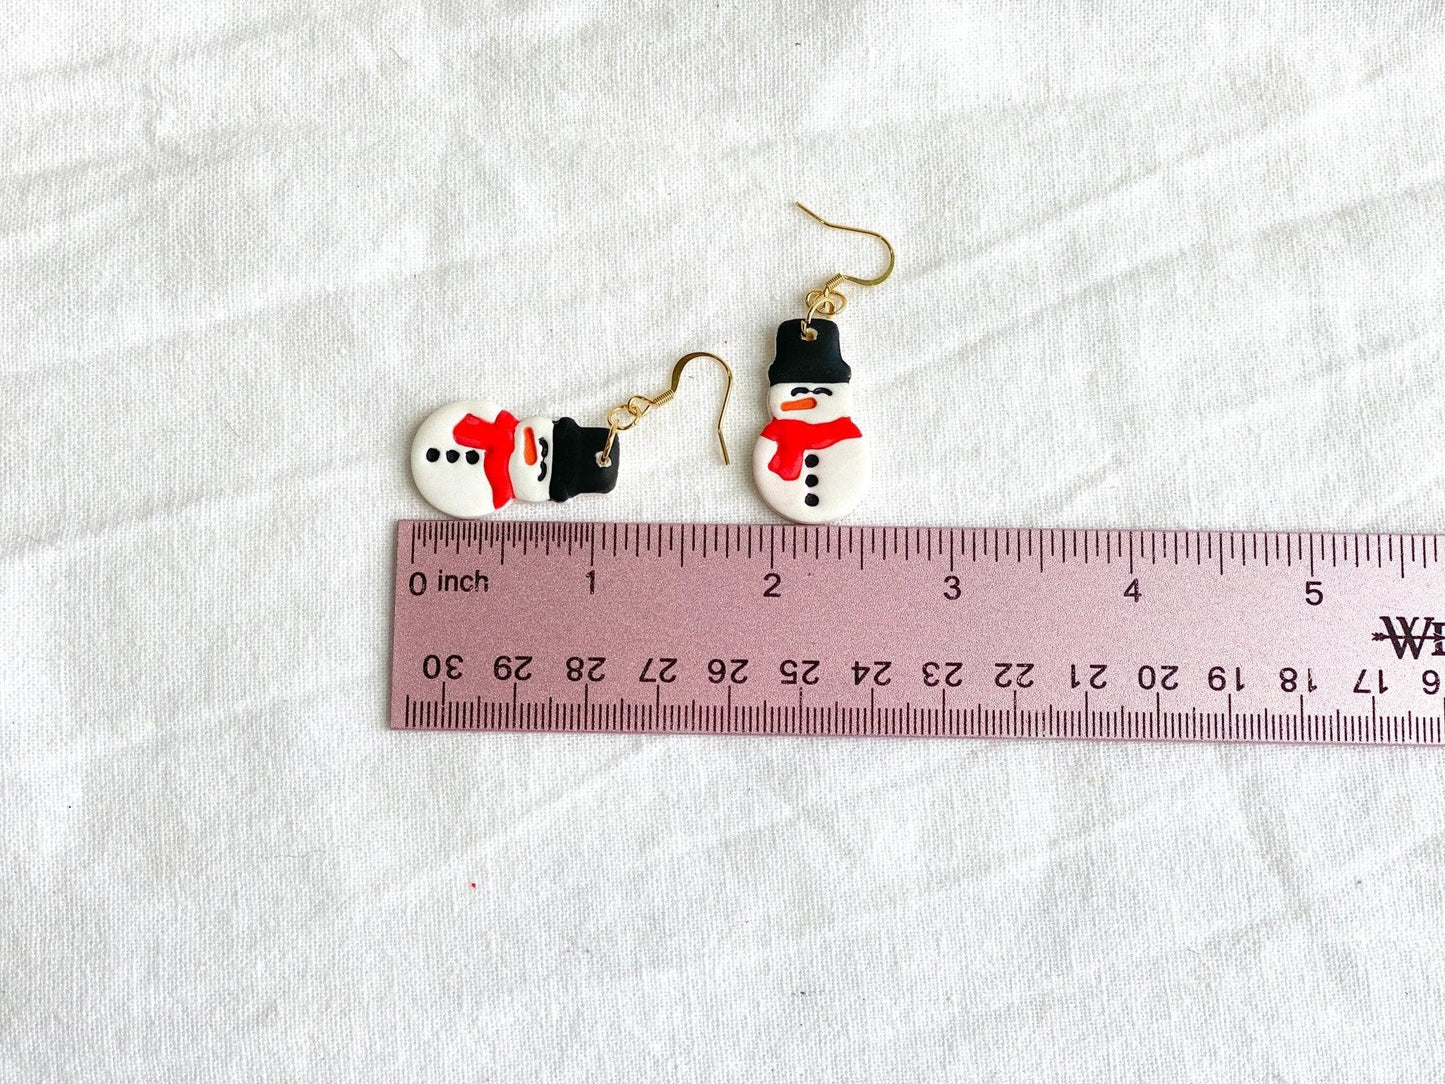 Cute Handmade Clay Snowman Earrings on Gold Ear Wires made from Surgical Steel laying on white cloth next to pink ruler